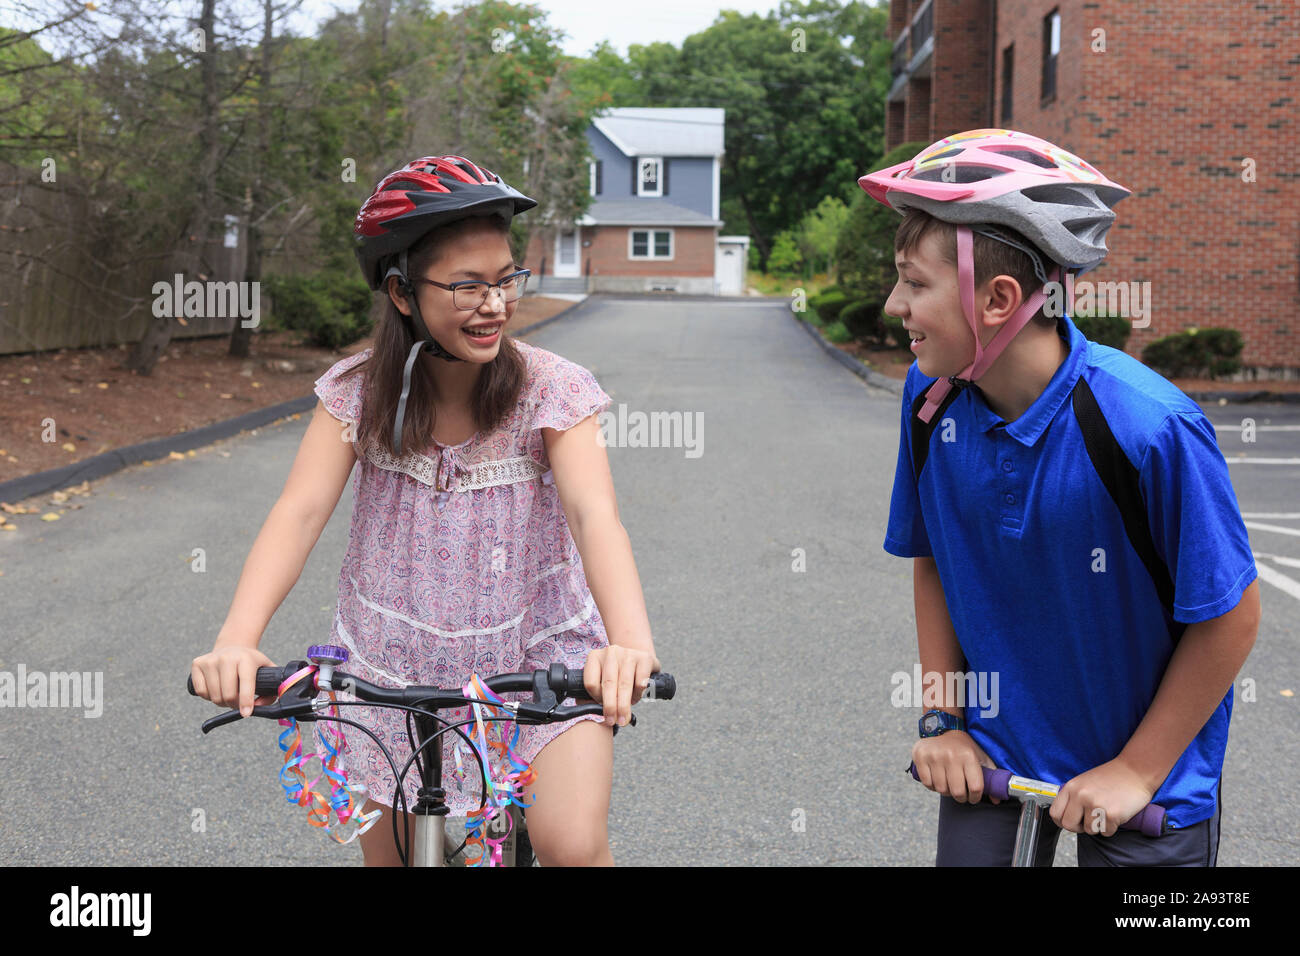 Teens girl who has Learning Disability riding bicycle with her brother Stock Photo